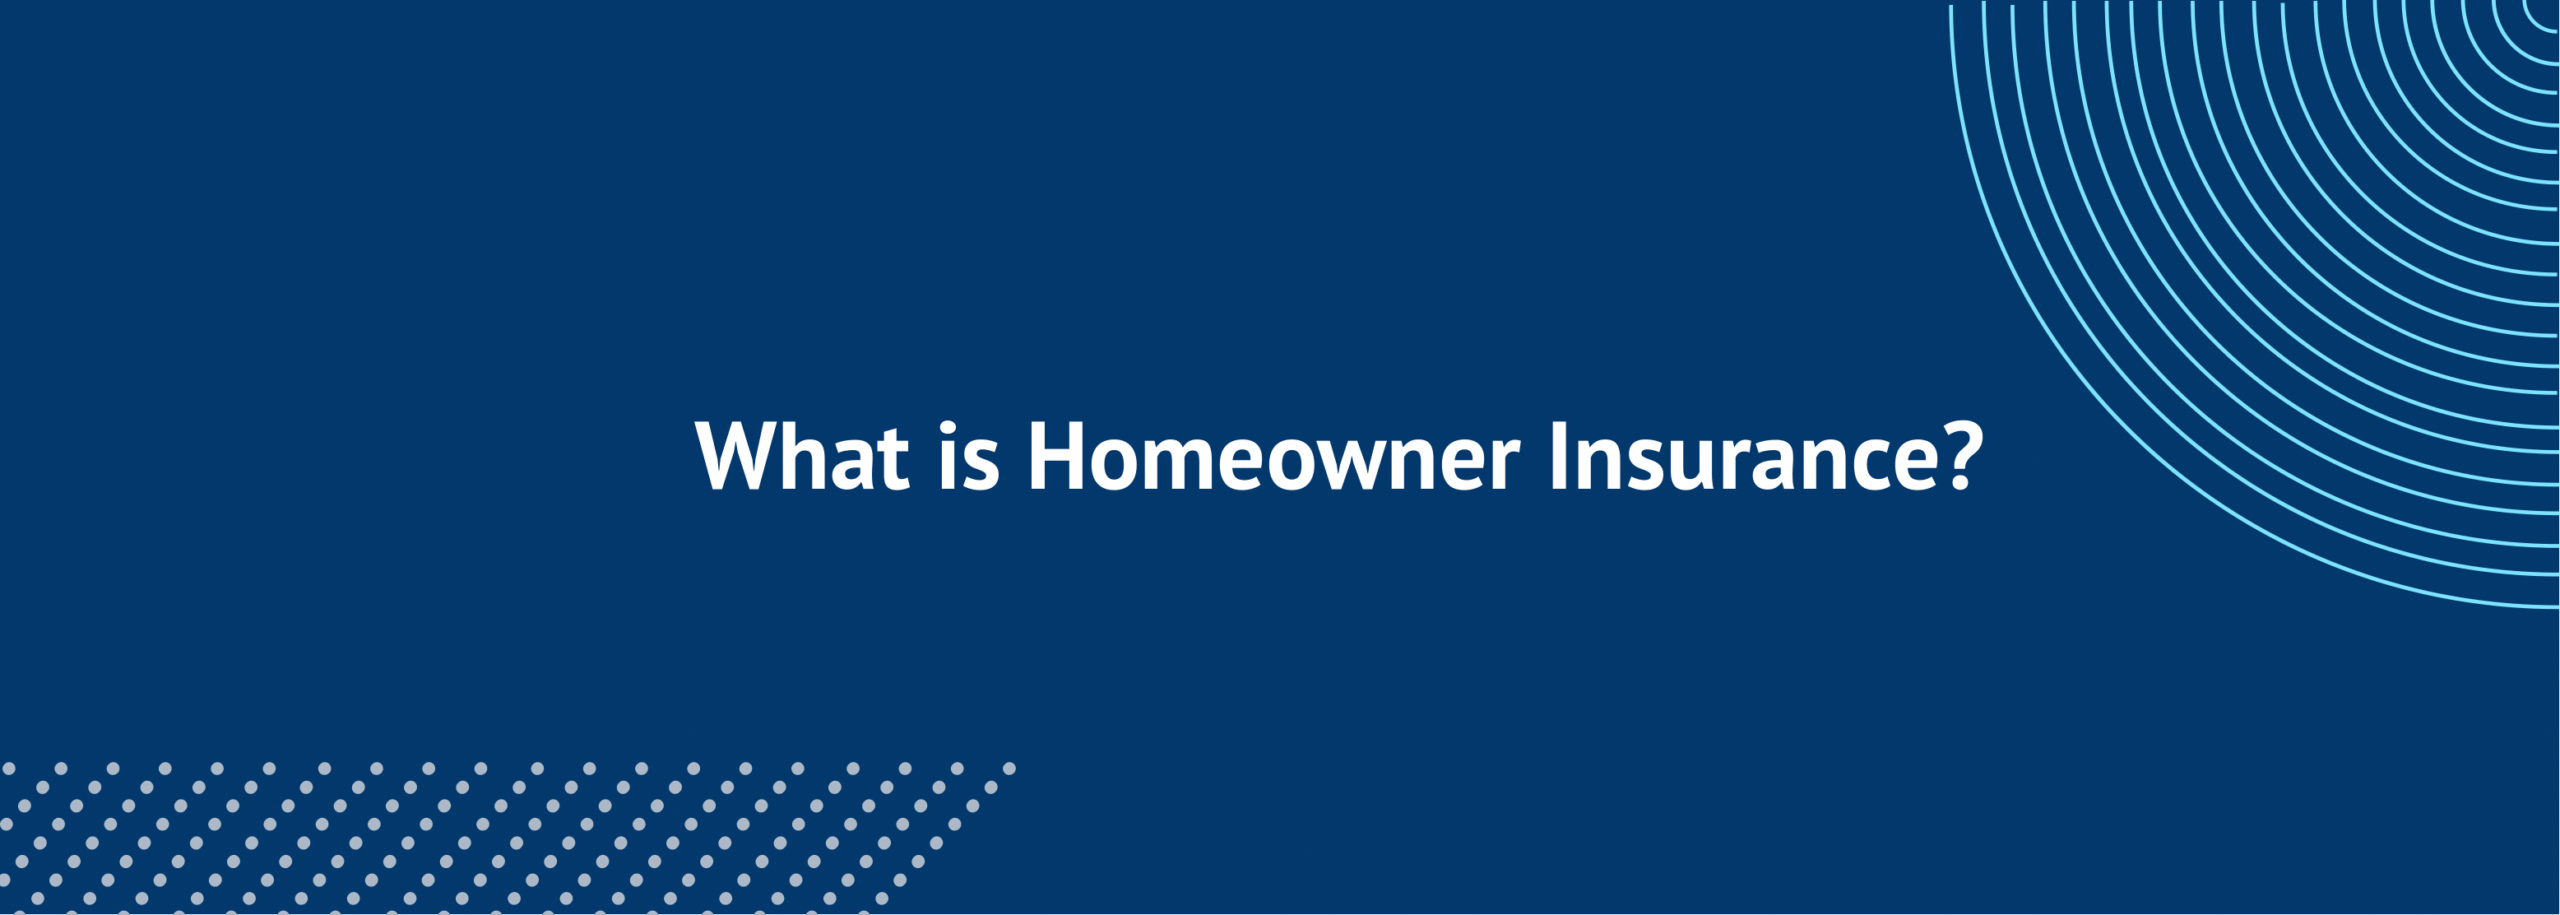 Homeowner insurance is an insurance policy designed to protect the borrower’s primary residence.